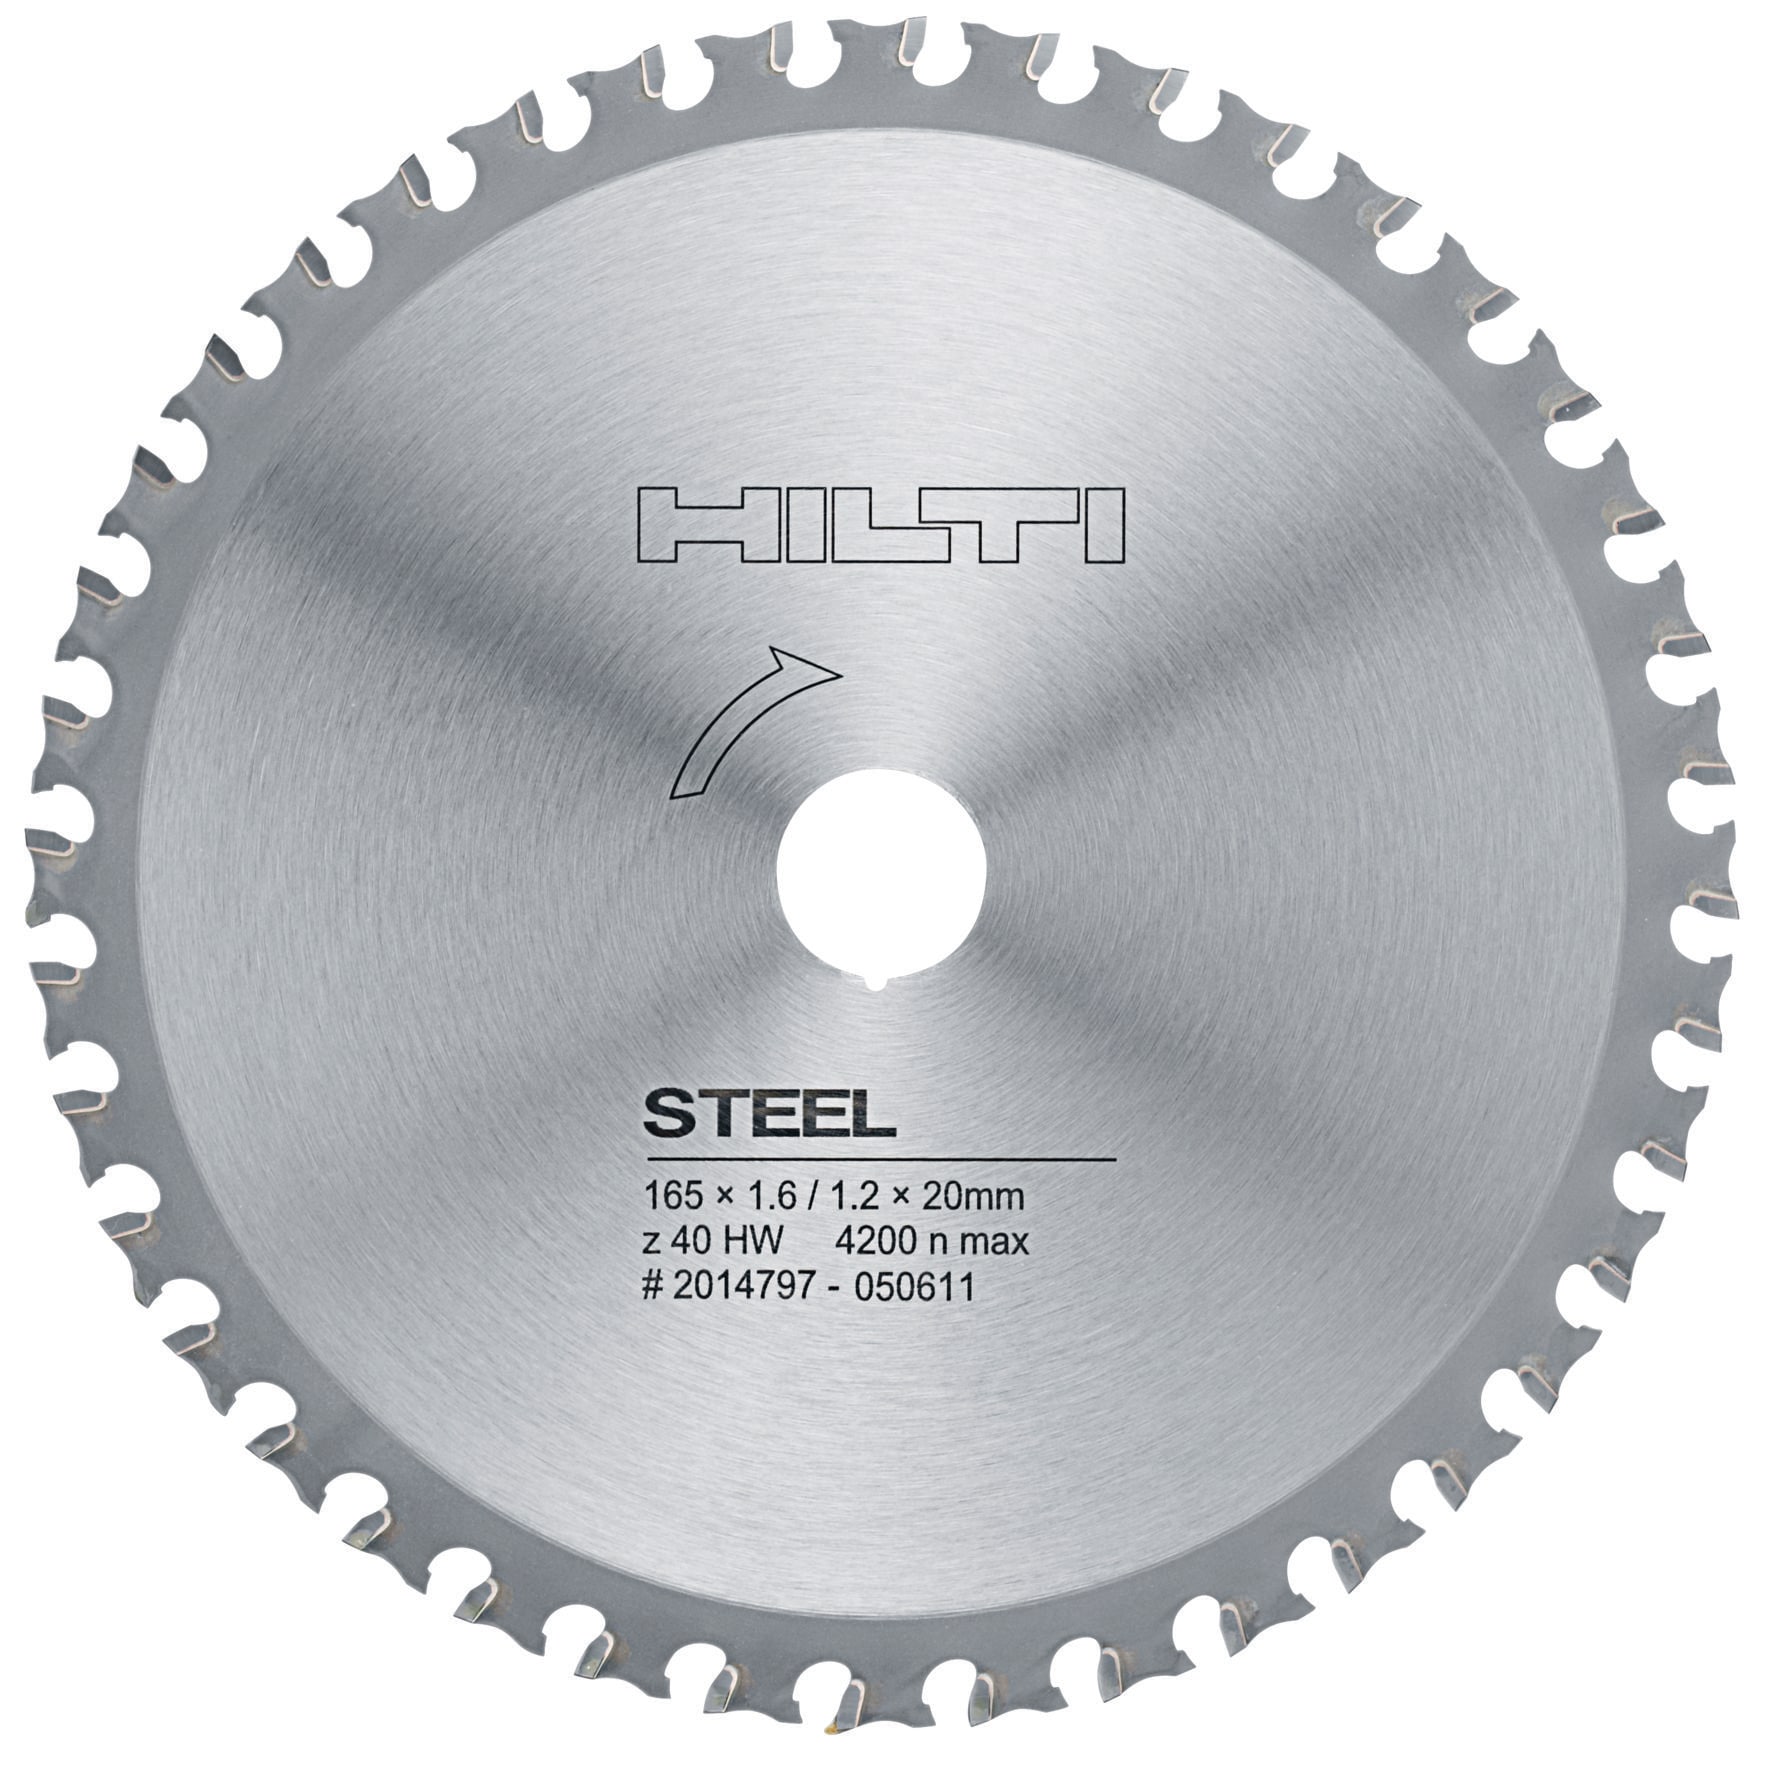 Details about   HILTI CIRCULAR SAW BLADE 6-1/2" 24T FAST SHIP 10 PCS NEW 